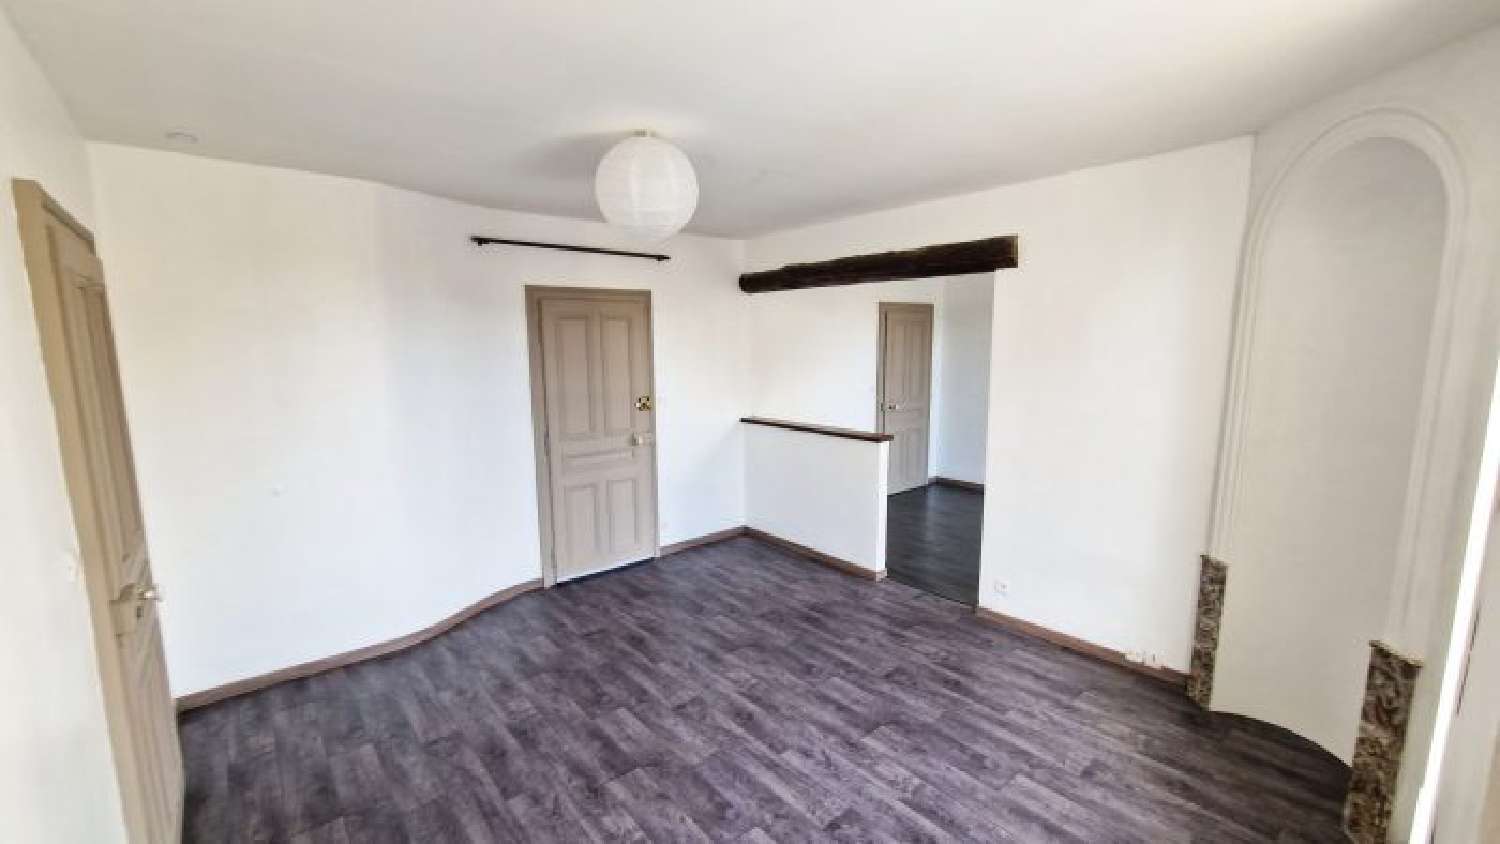  te koop appartement Pagny-sur-Moselle Meurthe-et-Moselle 7